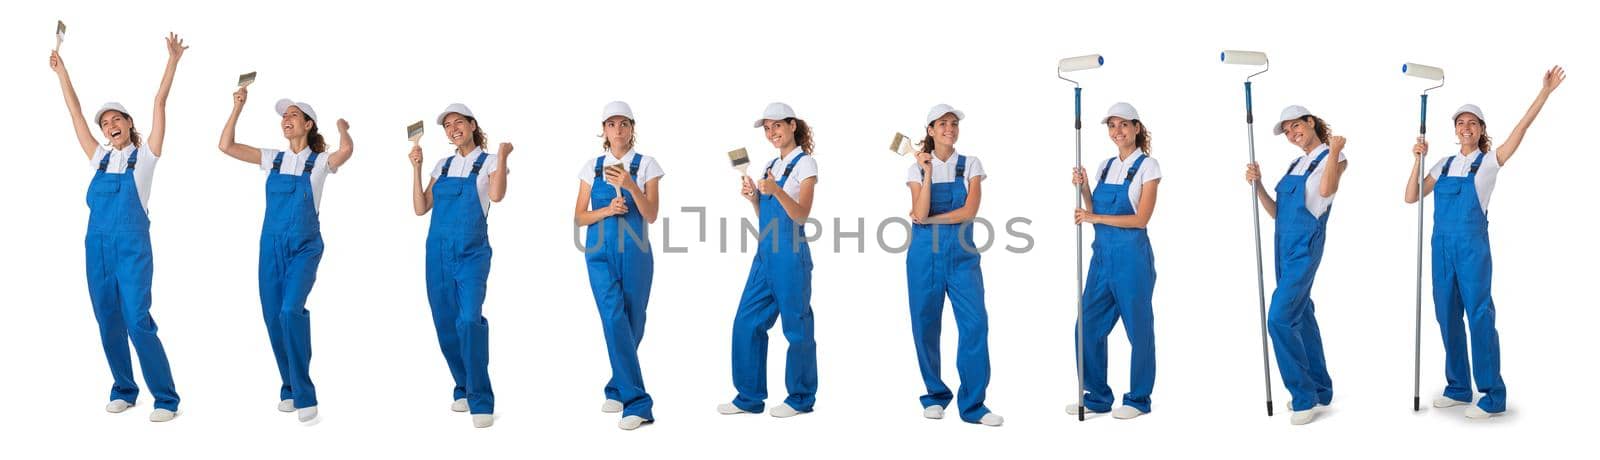 set of construction workers. portraits of woman professional painter, decorator or repairman in workwear isolated on white background. industry and building concept